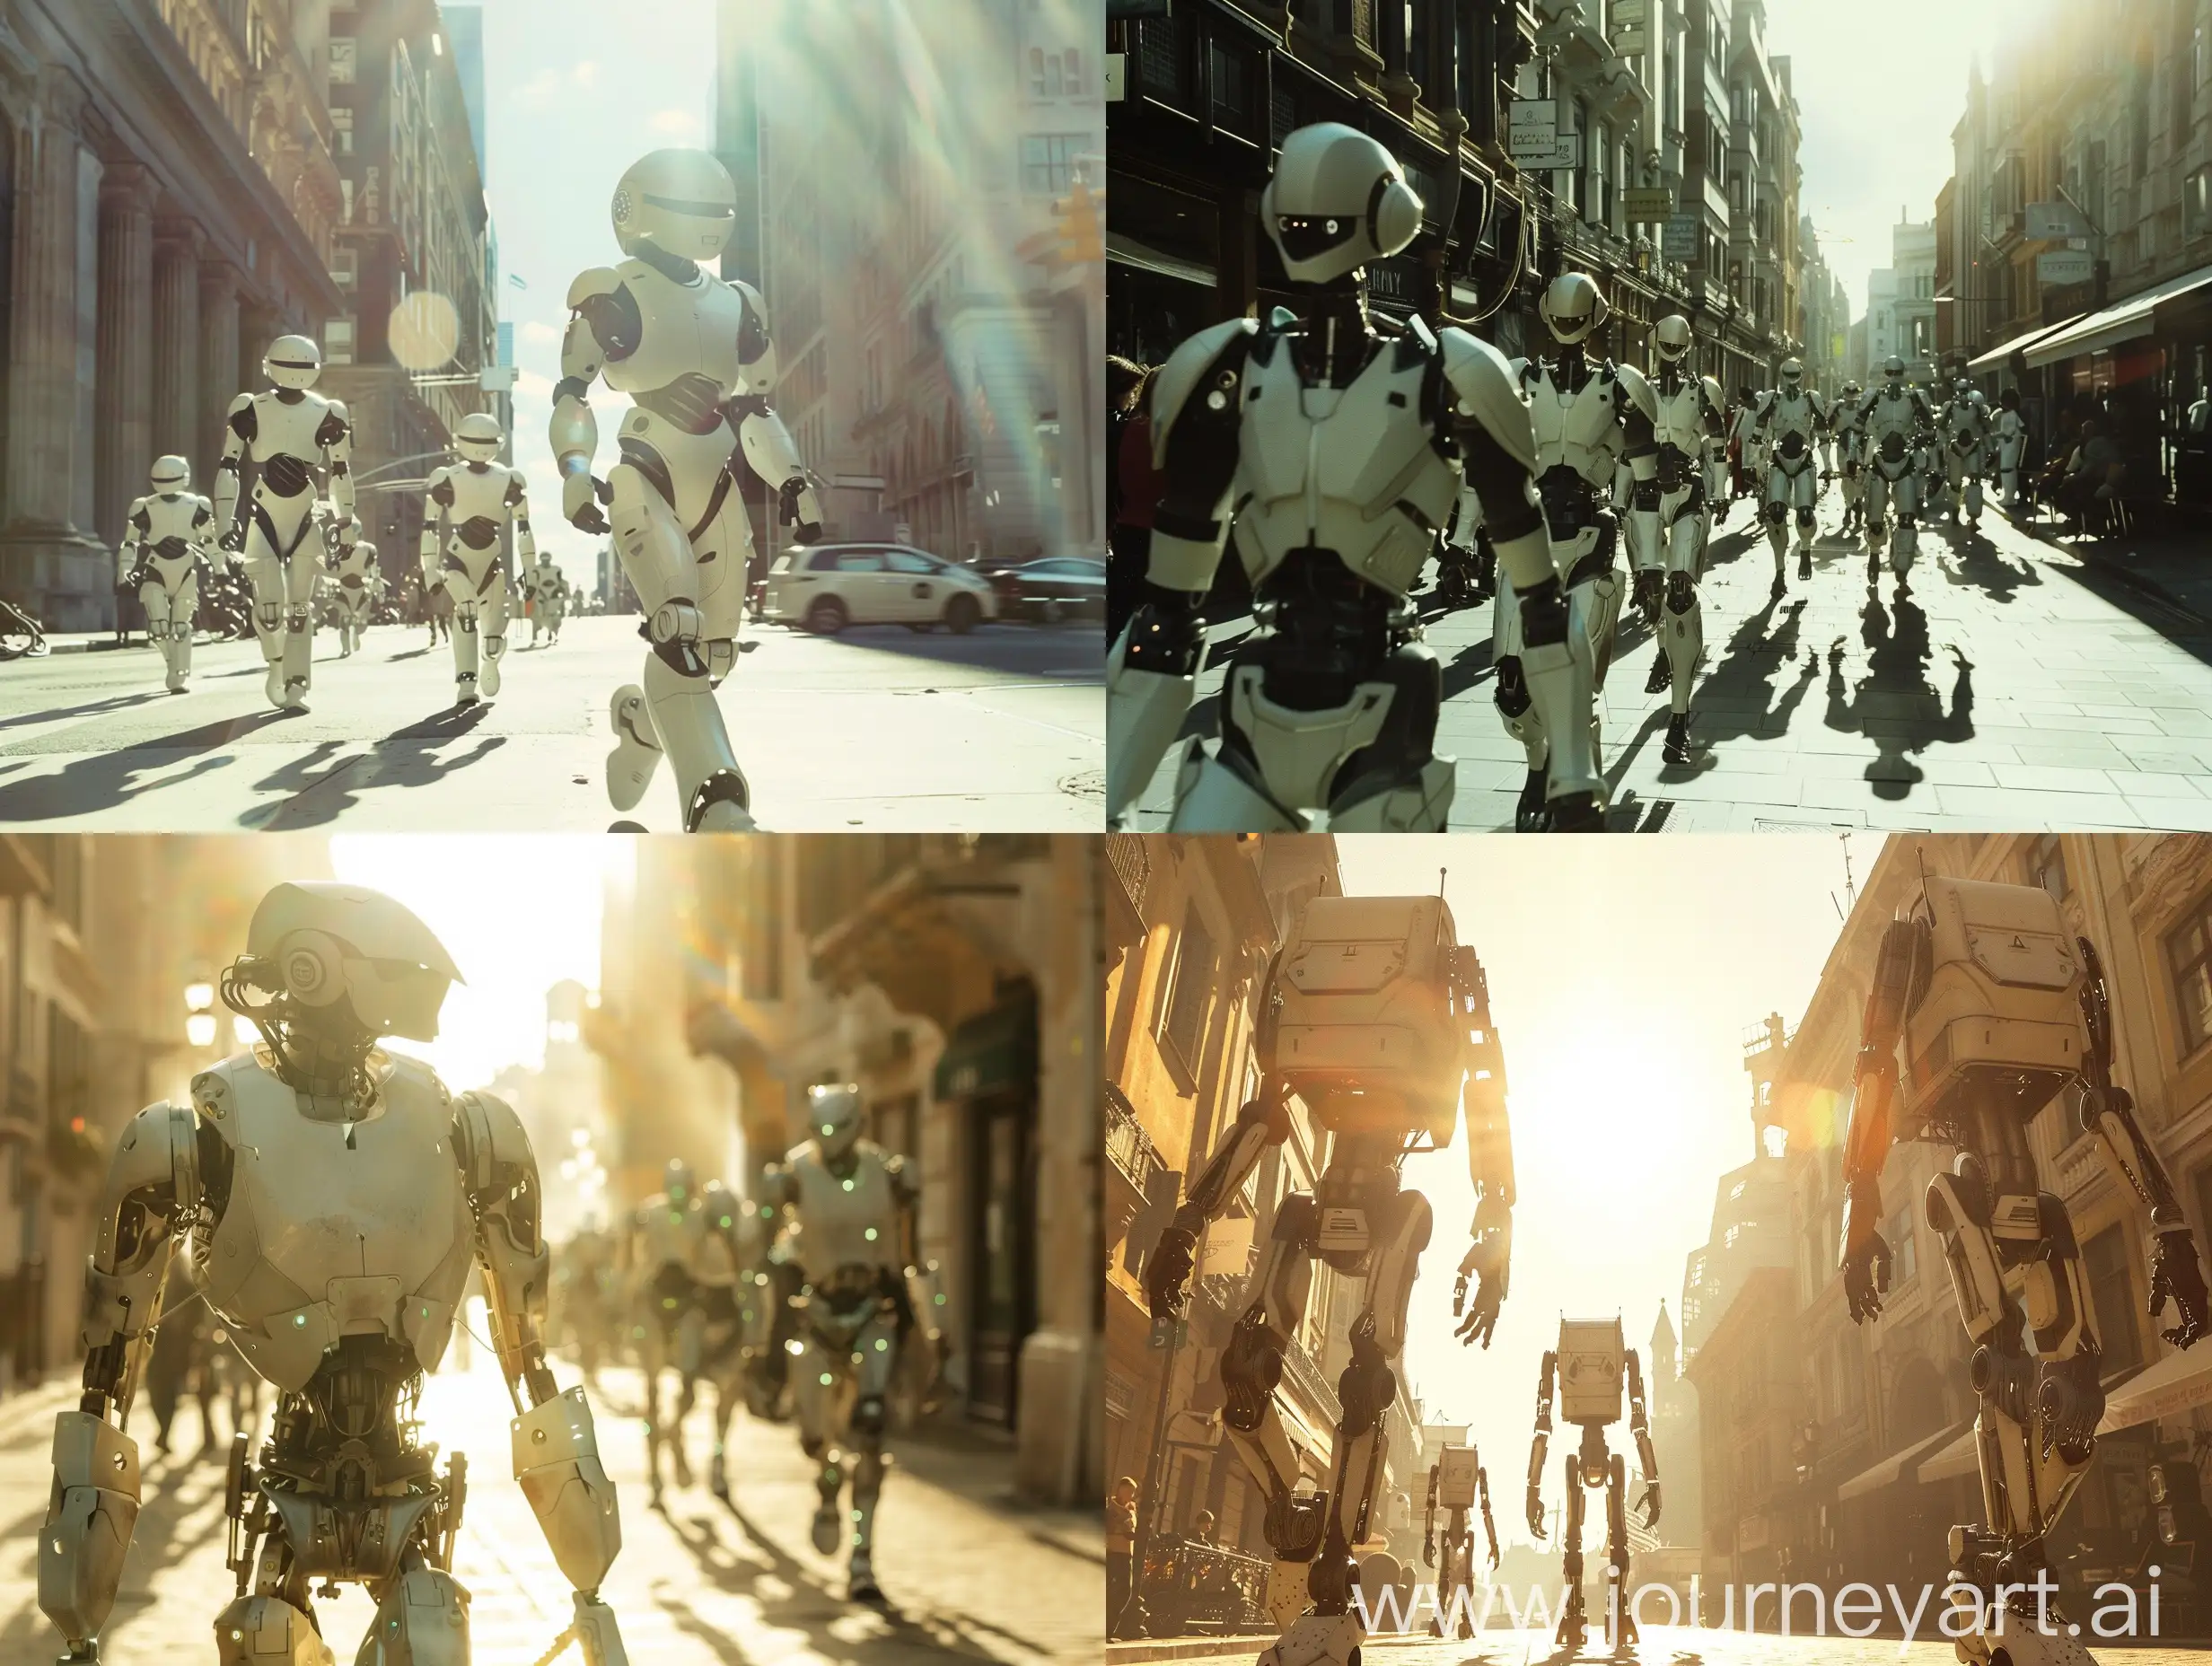 A cinematic still. A sunny day in the summer. Robots walking on the Streets. A movie by Christopher Nolan